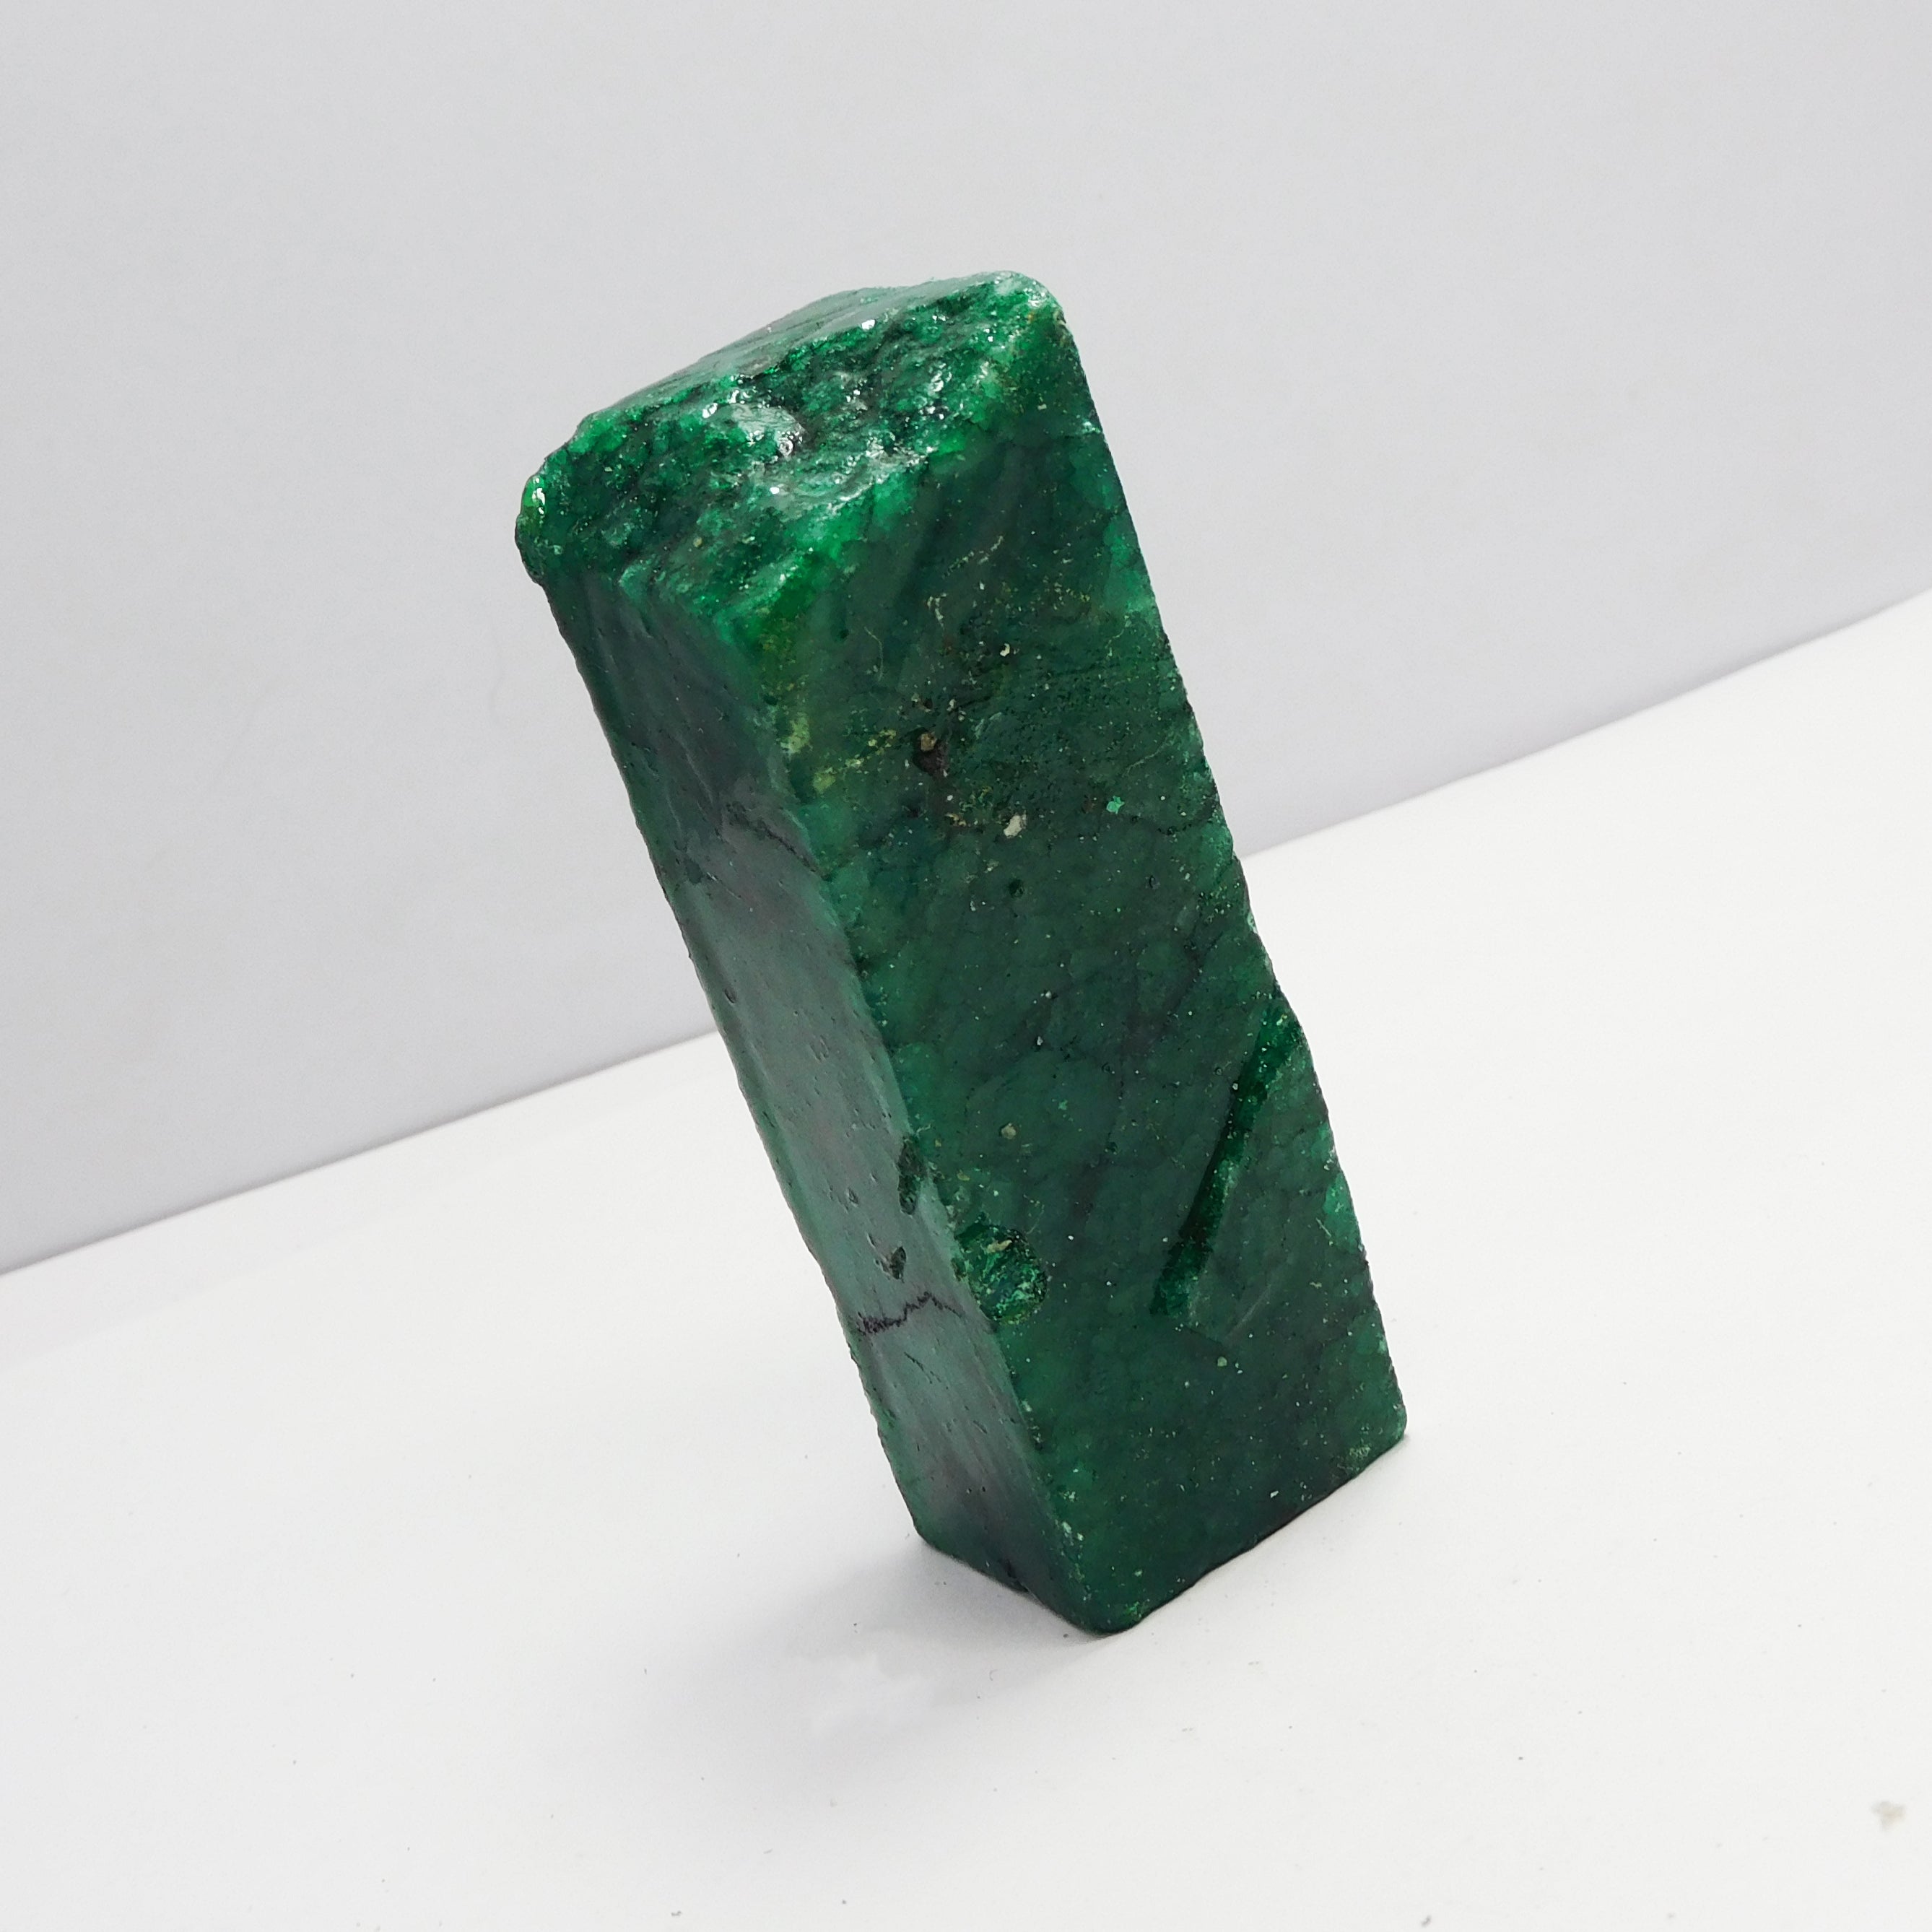 Best Offer !! Gift For Mother/ Sister | Uncut Rough From Colombia 443.65 Carat Natural Green Emerald Rough Certified Loose Gemstone